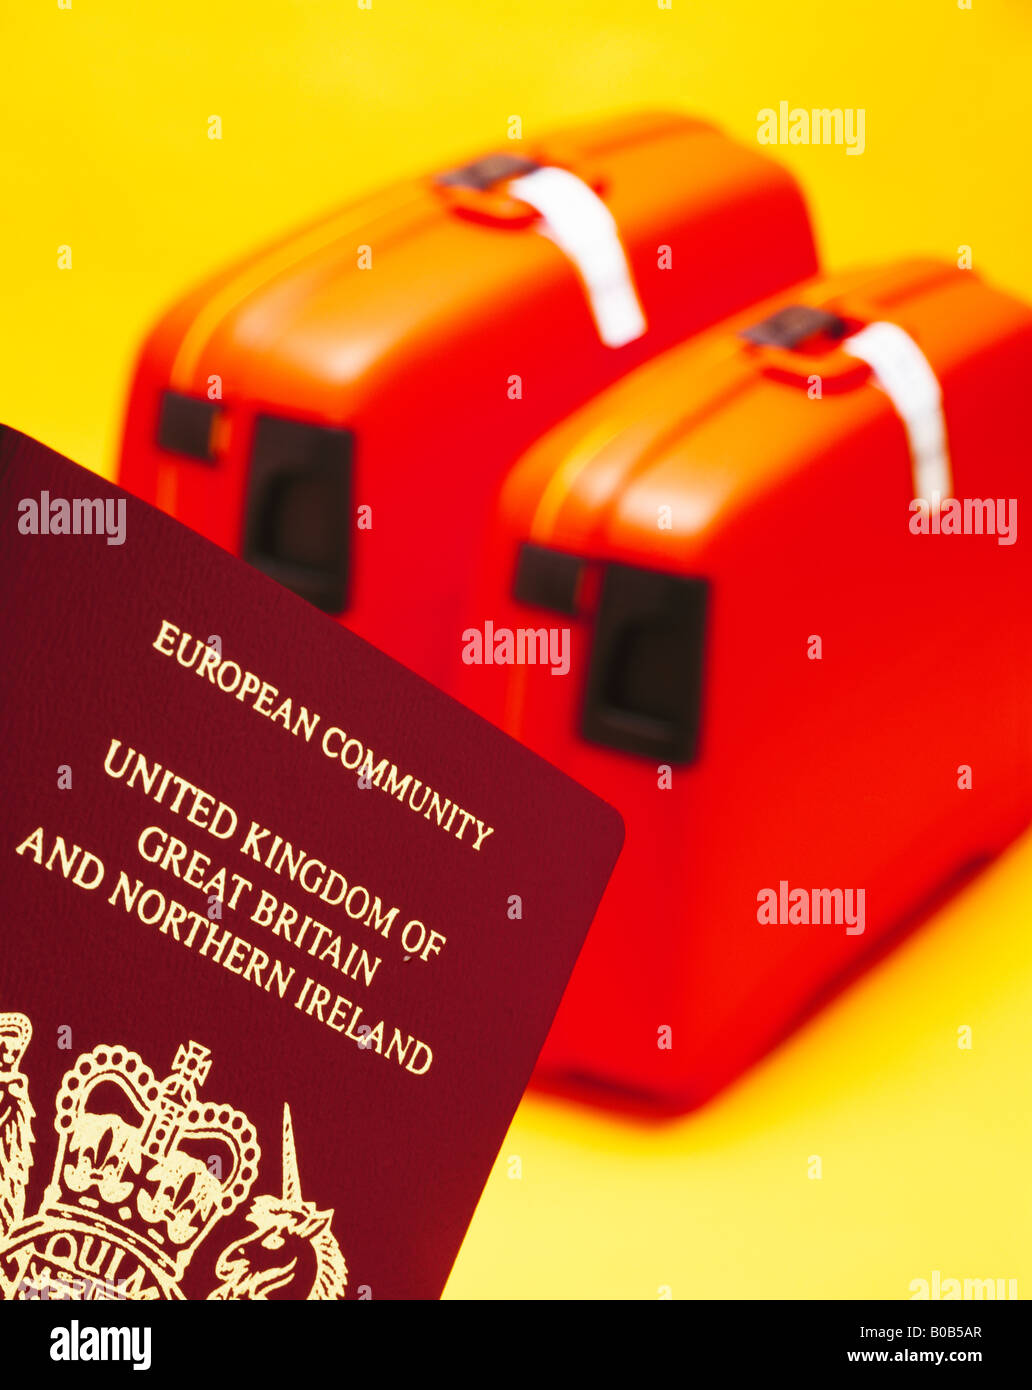 A British passport with 2 suitcases on a yellow background Stock Photo